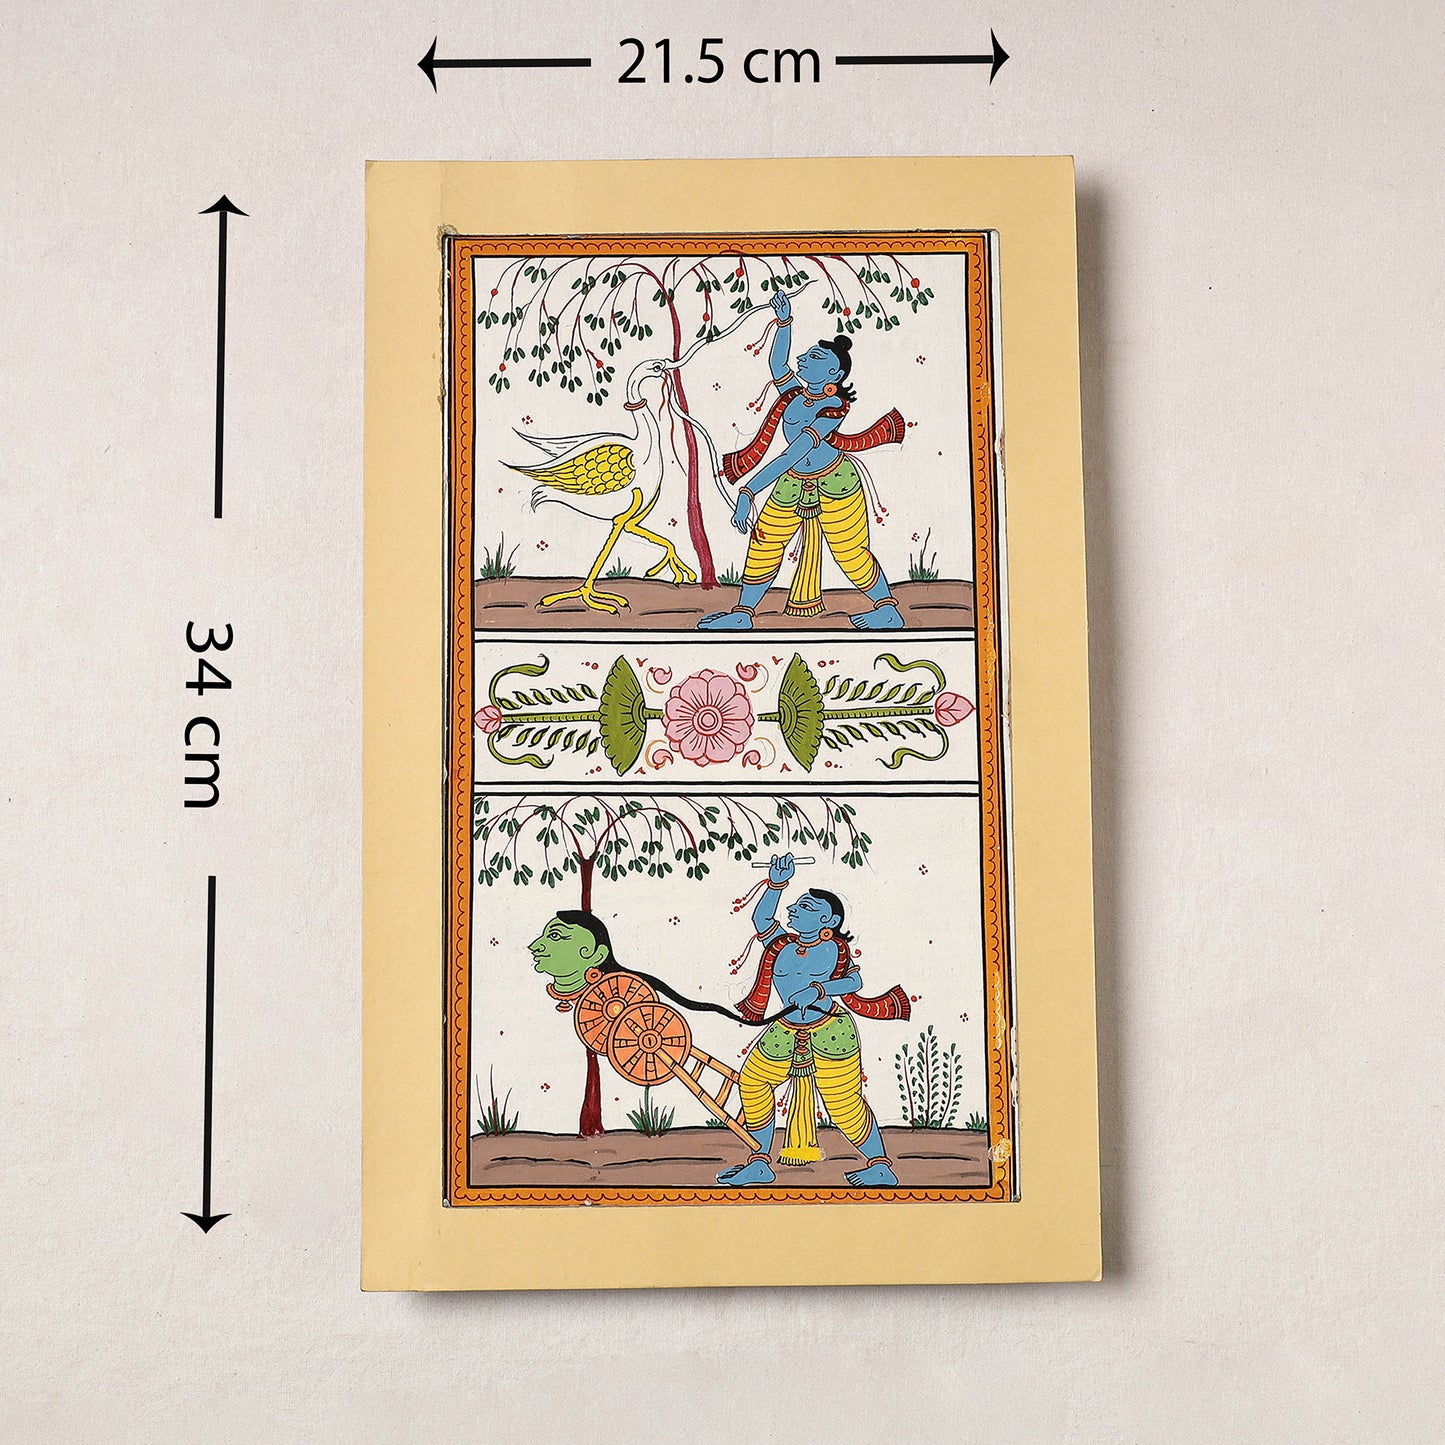 Pattachitra Painting on Handmade Paper (13 x 8 in)